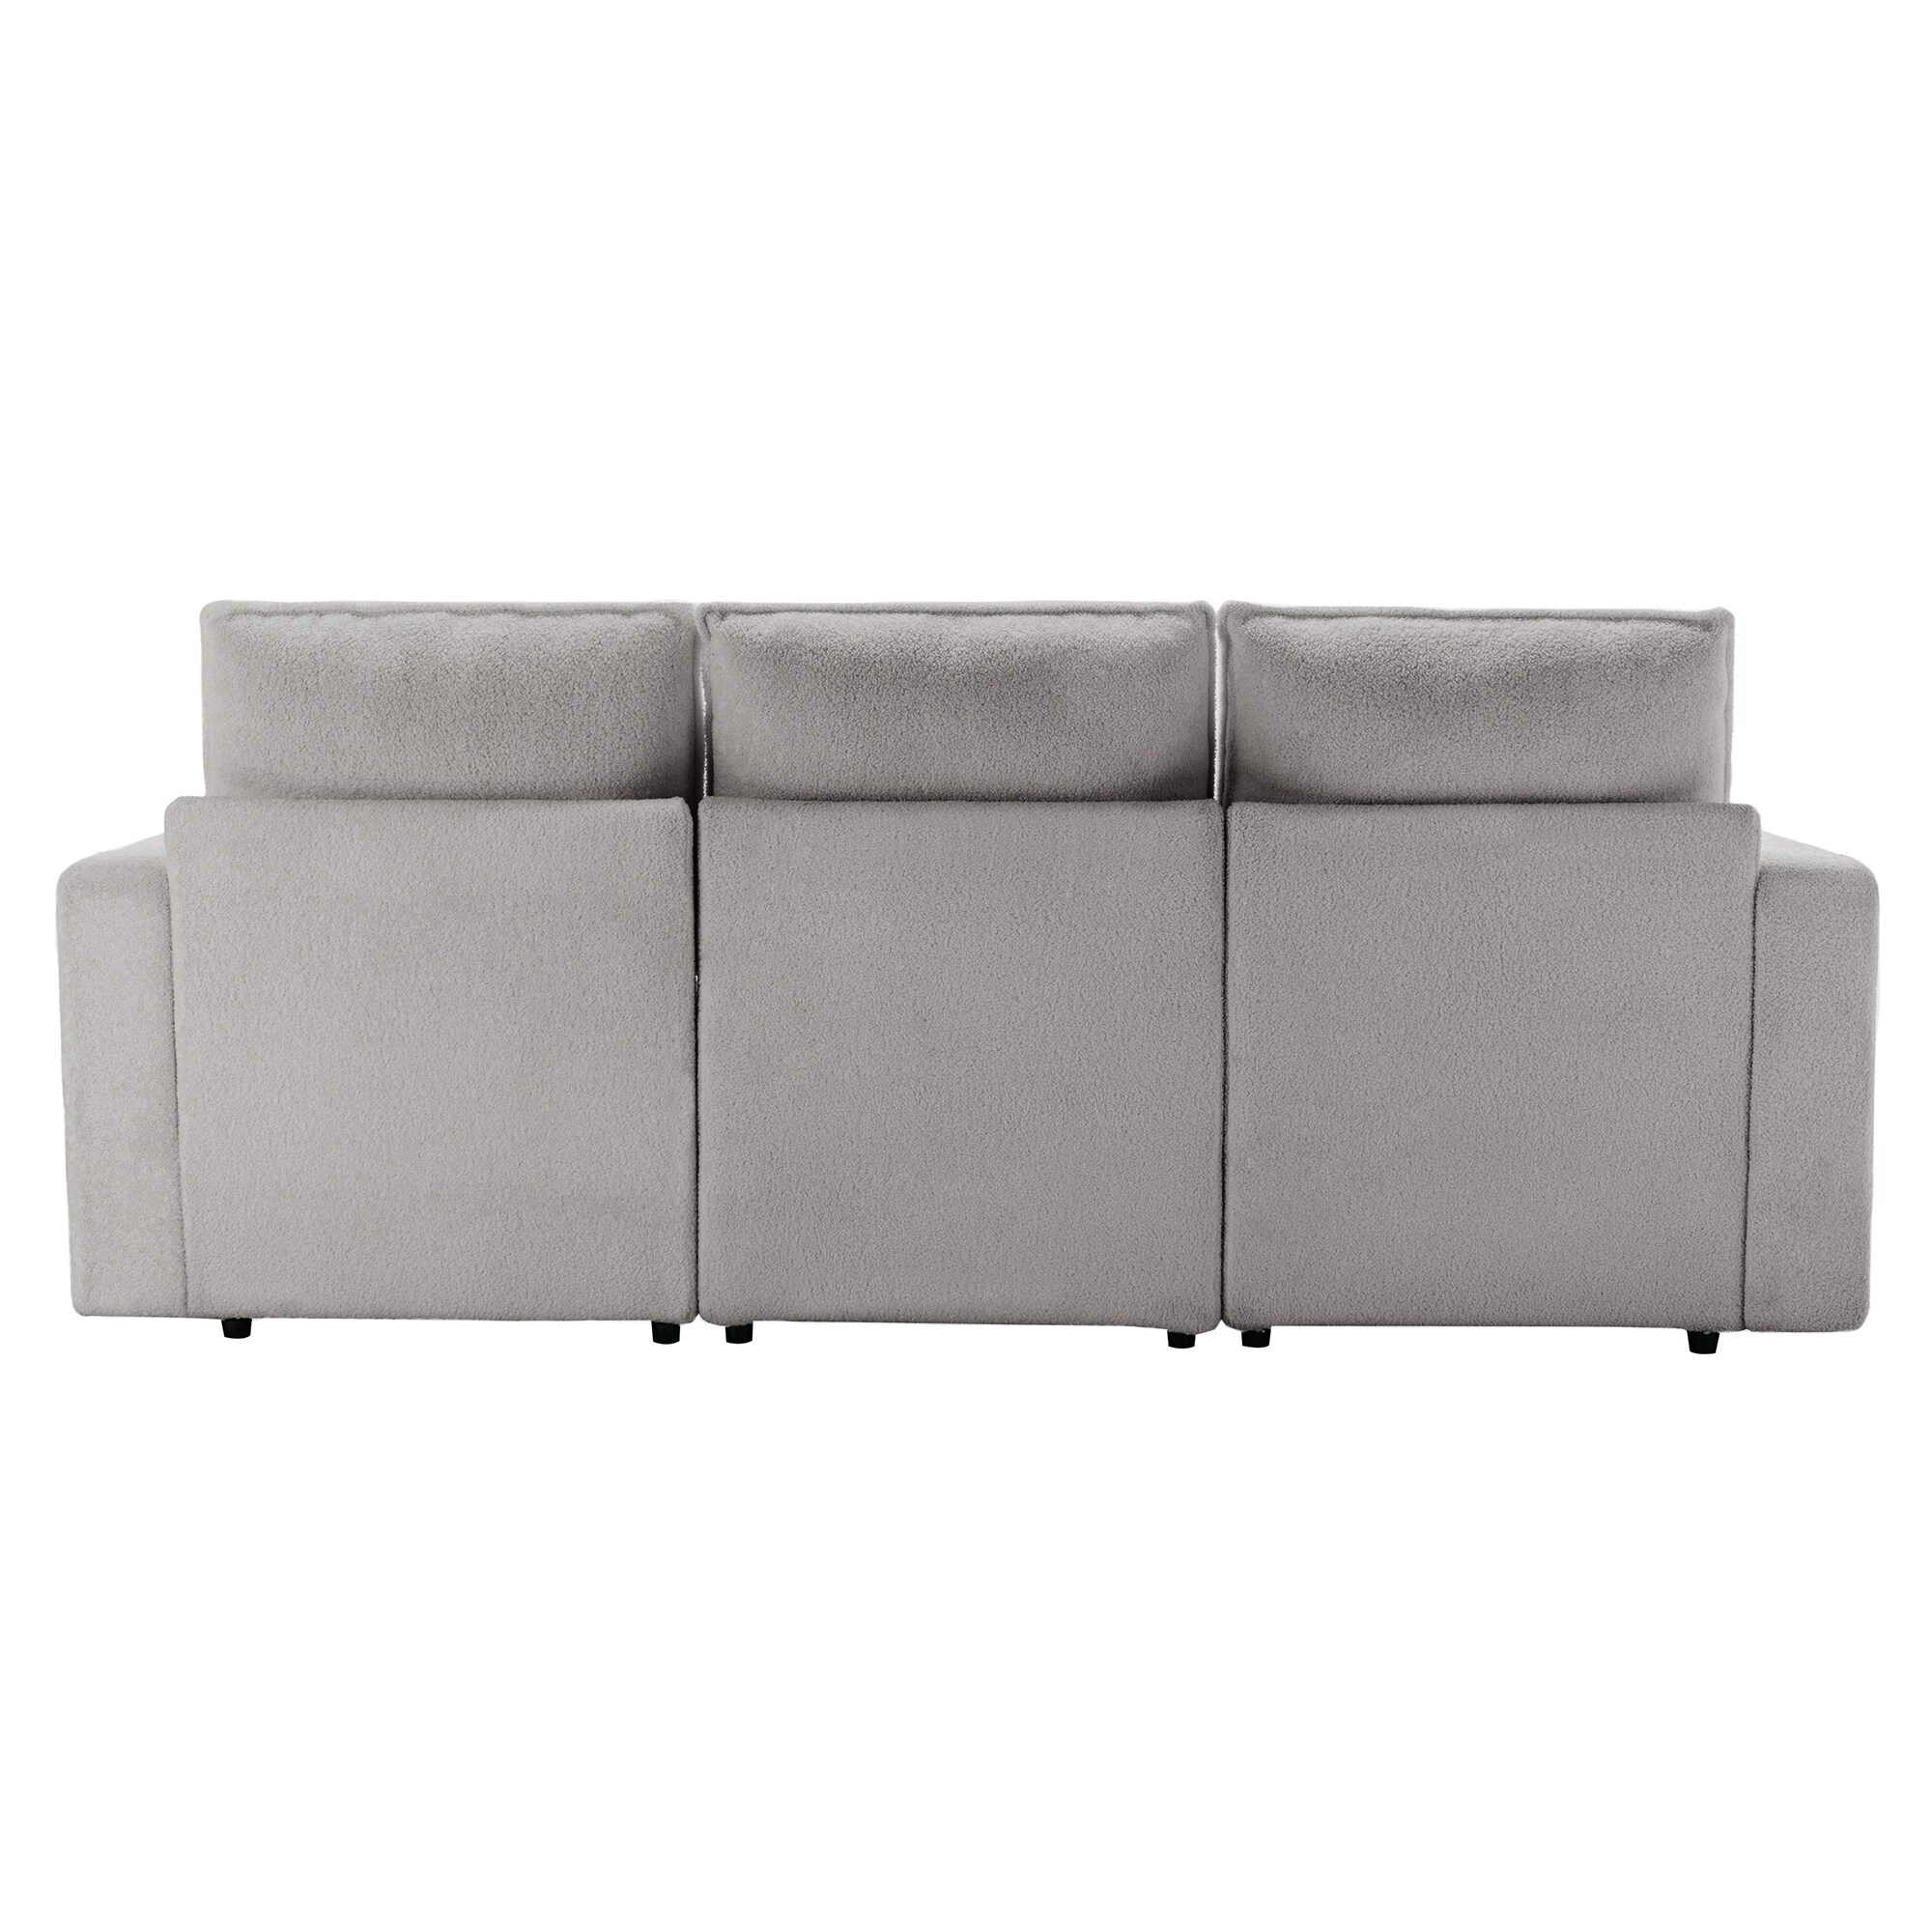 https://ak1.ostkcdn.com/images/products/is/images/direct/3aea0af67c33821db200b8171b584bda4f67e6b2/3-Seat-Sofa-with-Removable-Back-and-Seat-Cushions-and-2-pillows%2CTeddy-Fabric-Couch-for-Living-Room%2C-Office%2C-Apartment.jpg